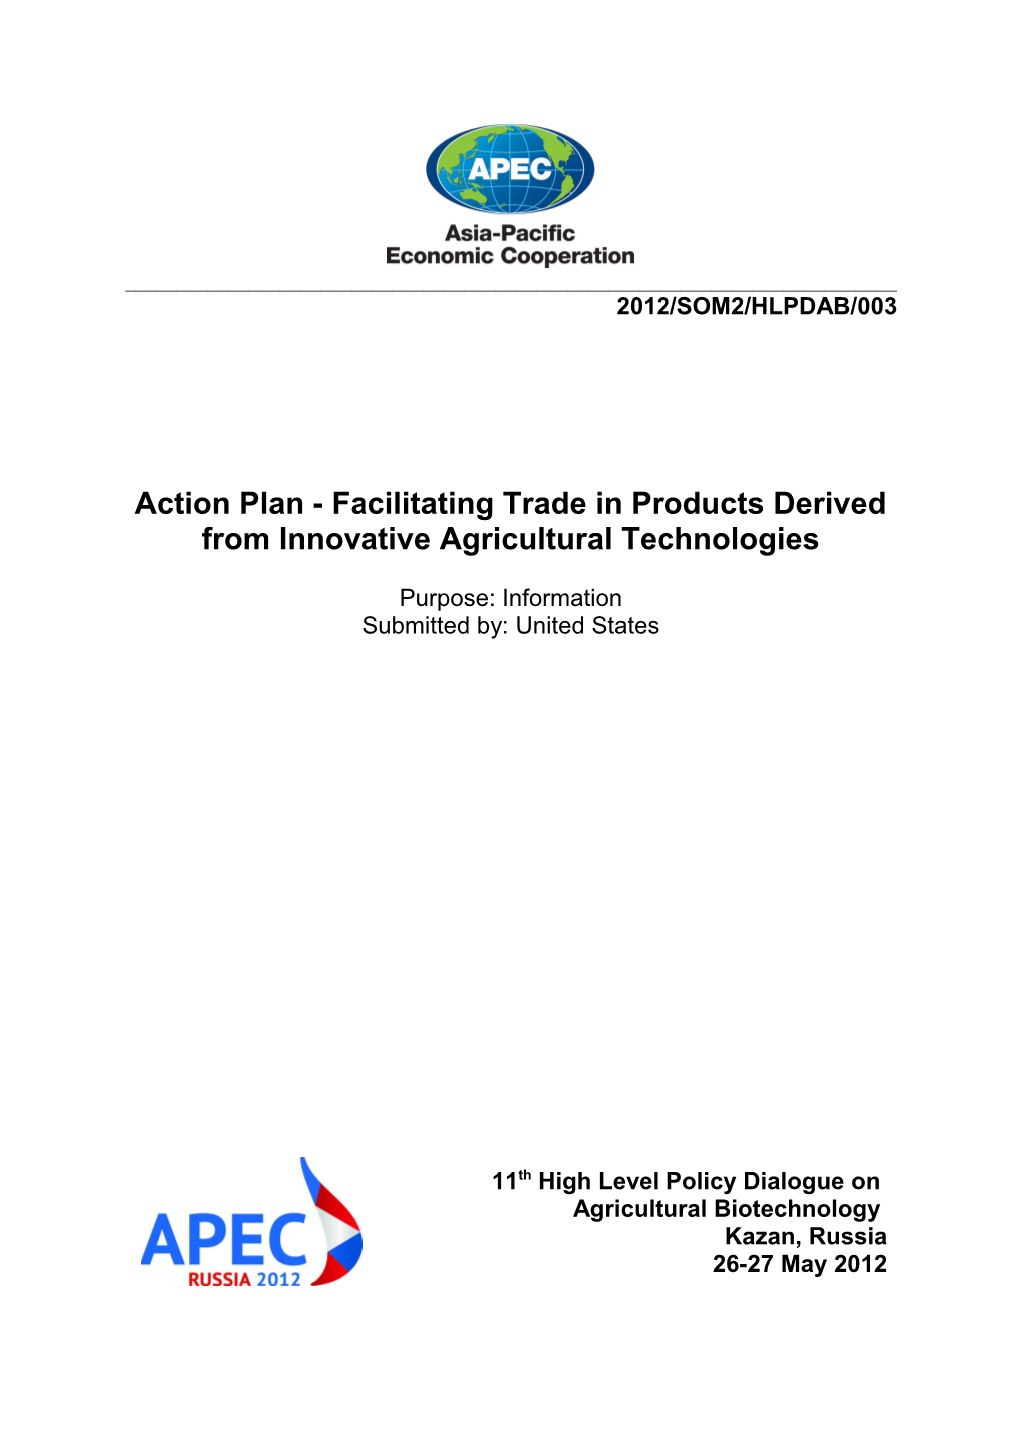 Apec Innovative Agricultural Technologies